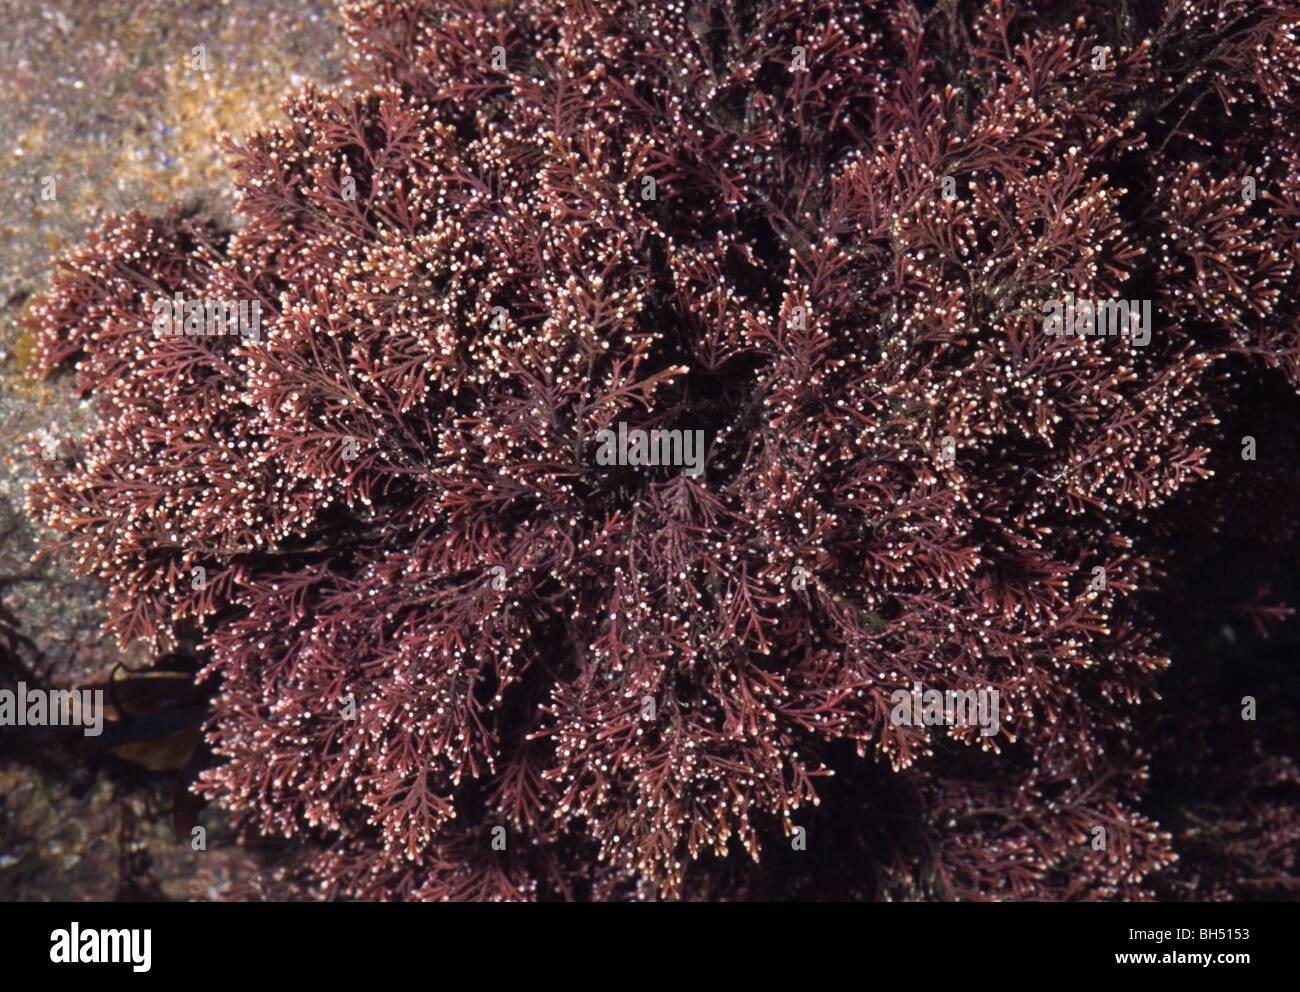 Close-up of seaweed (Polysiphonia lanosa) growing on another species of seaweed in a rock pool at low tide. Stock Photo